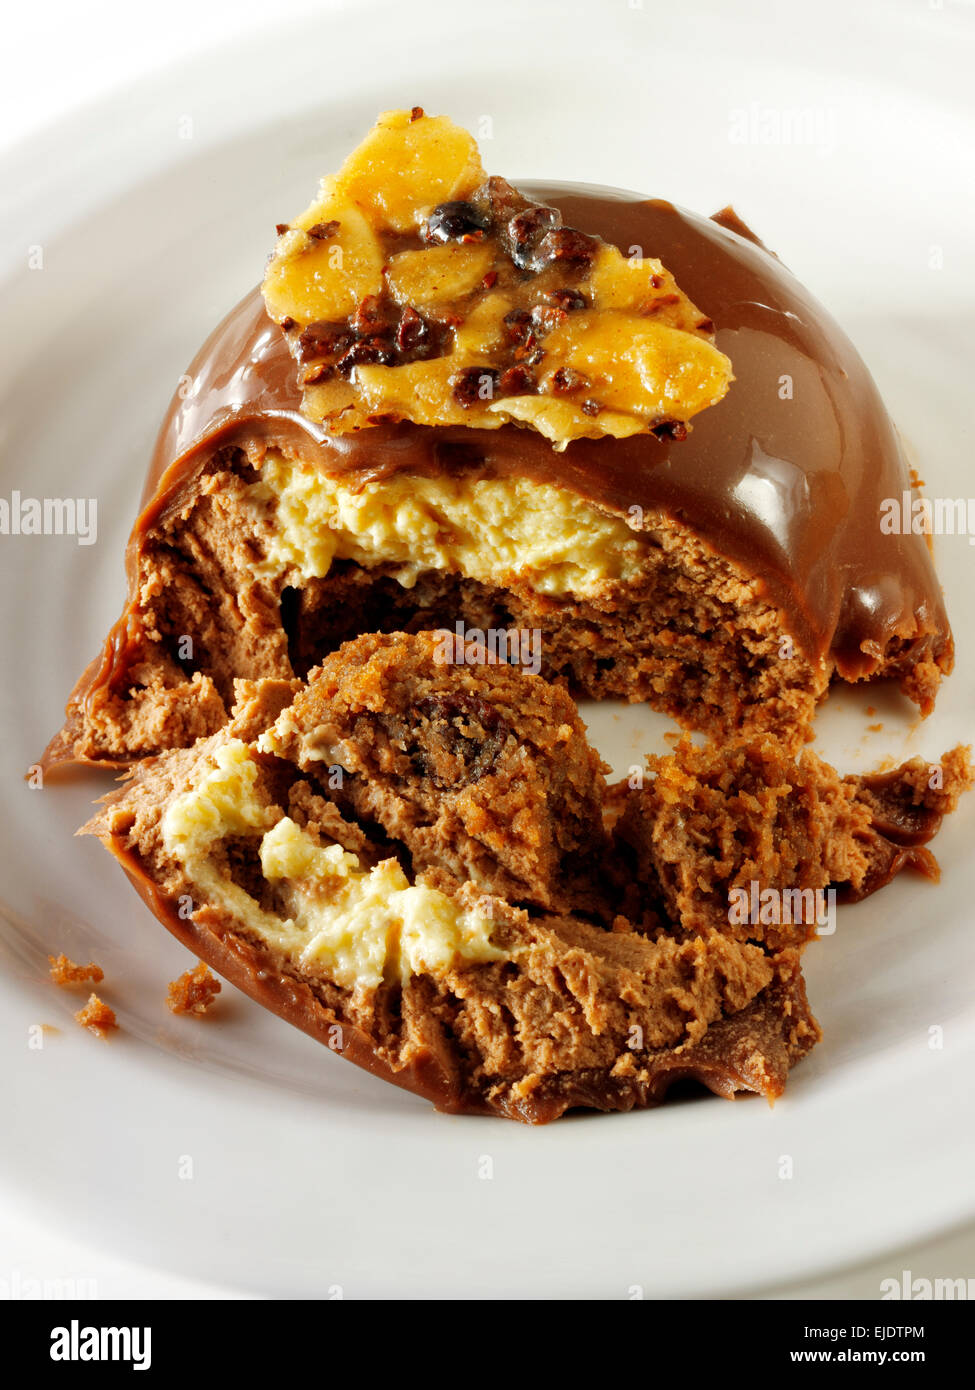 Cake with a pattered chocolate case and piped chestnut puree with cumquat sauce, in a modern designer dish Stock Photo